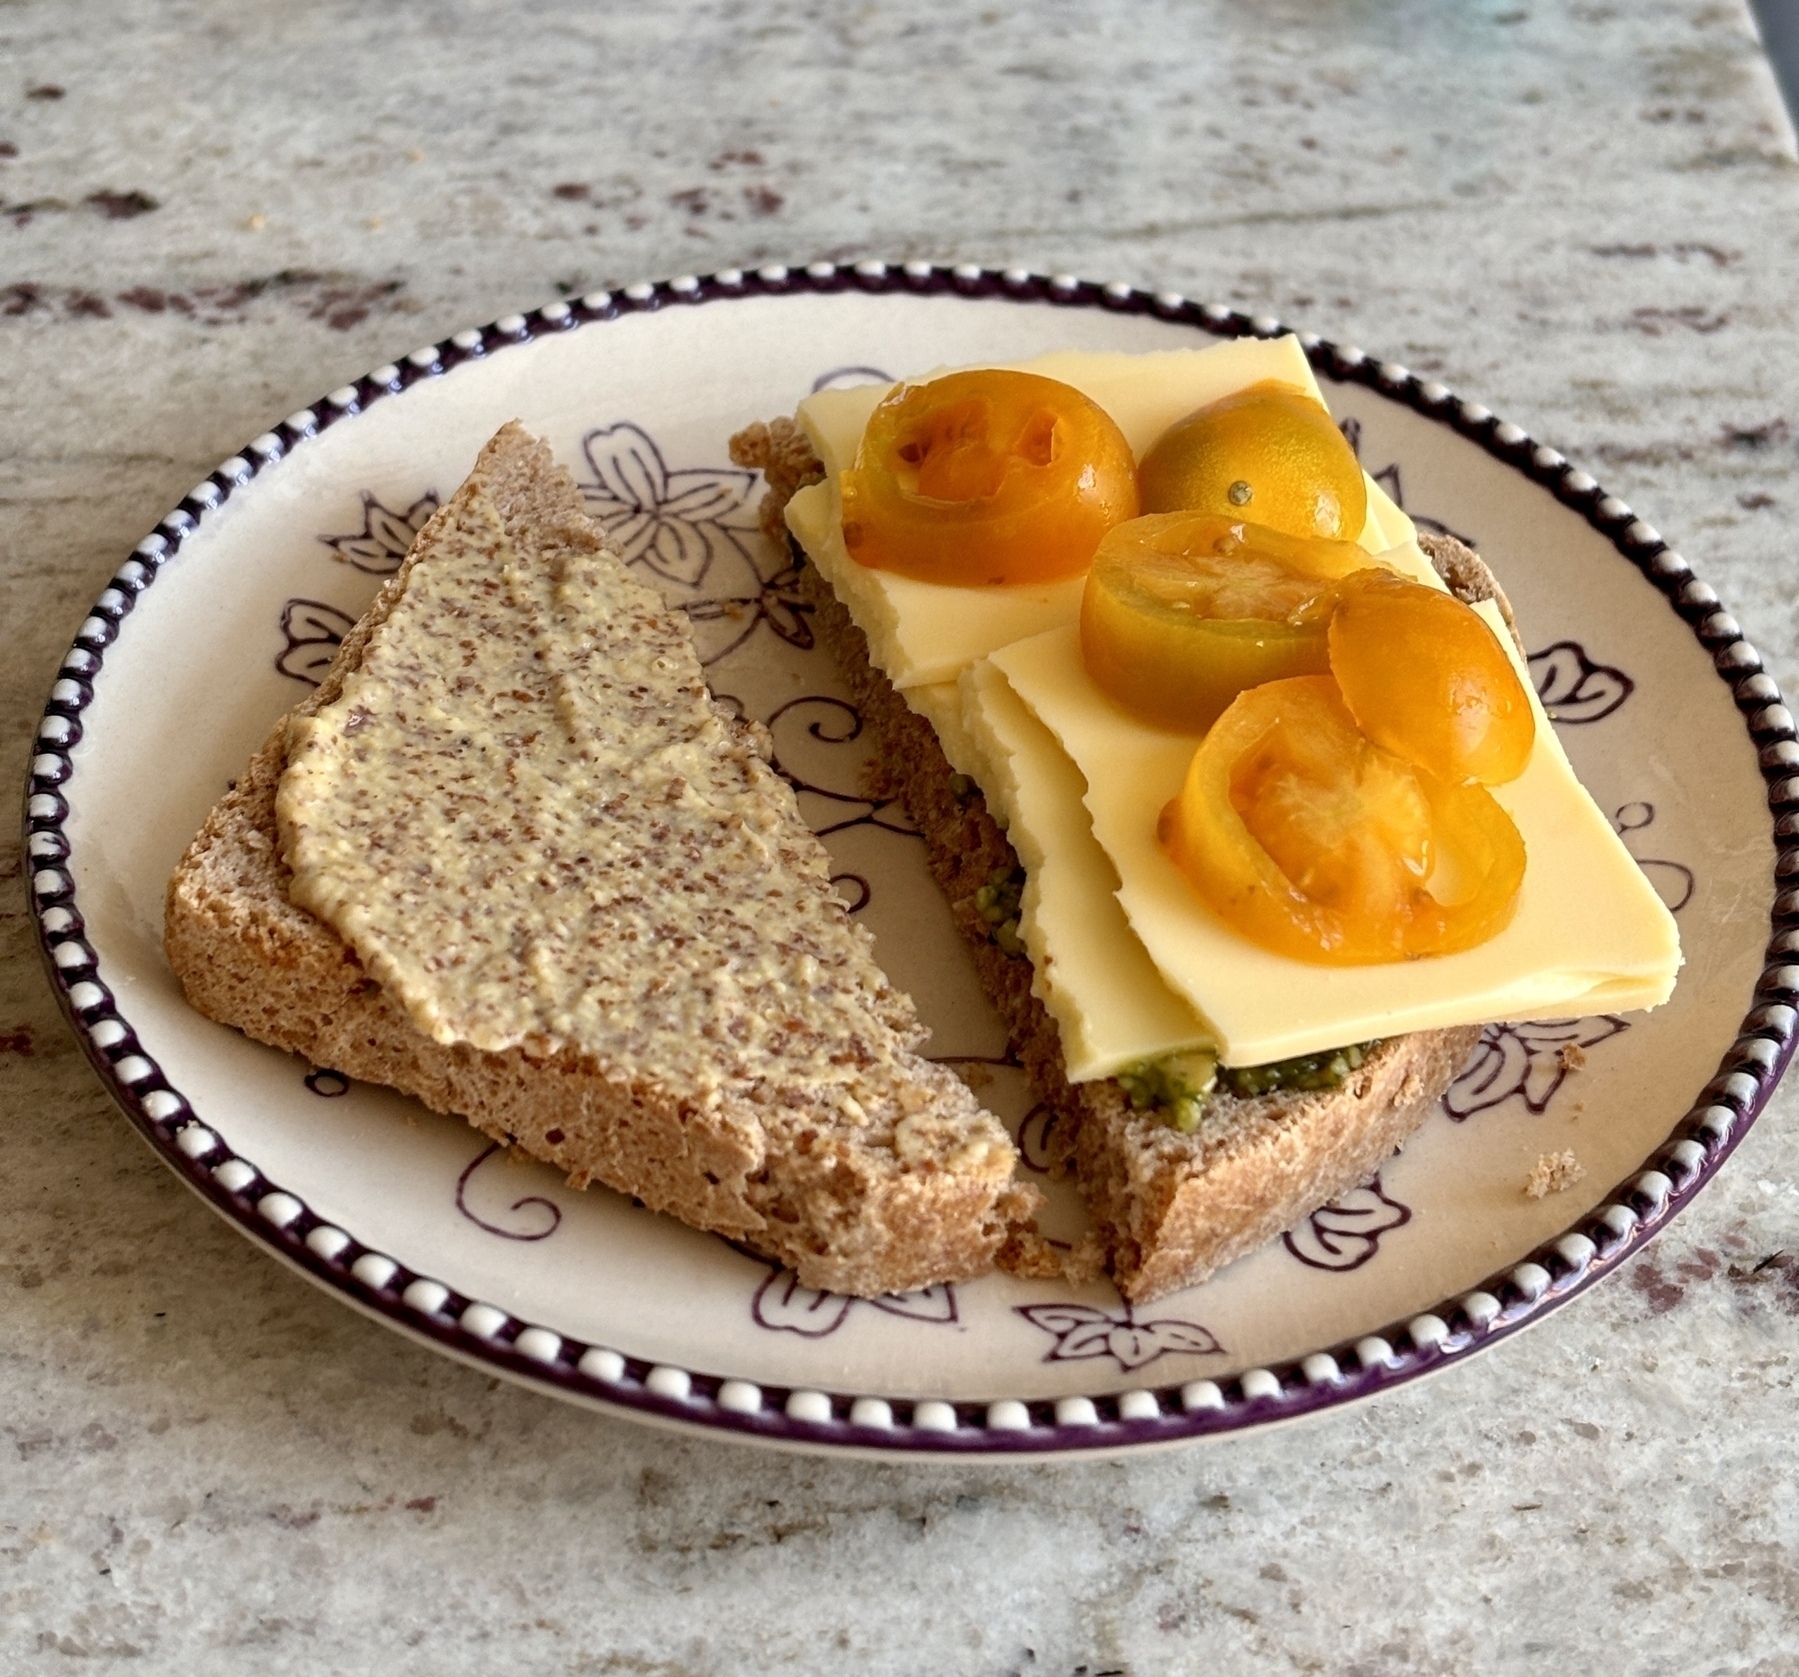 Auto-generated description: A plate holds a triangular sandwich with one slice of cheese and cut yellow cherry tomatoes on top of a bread slice spread with mustard.